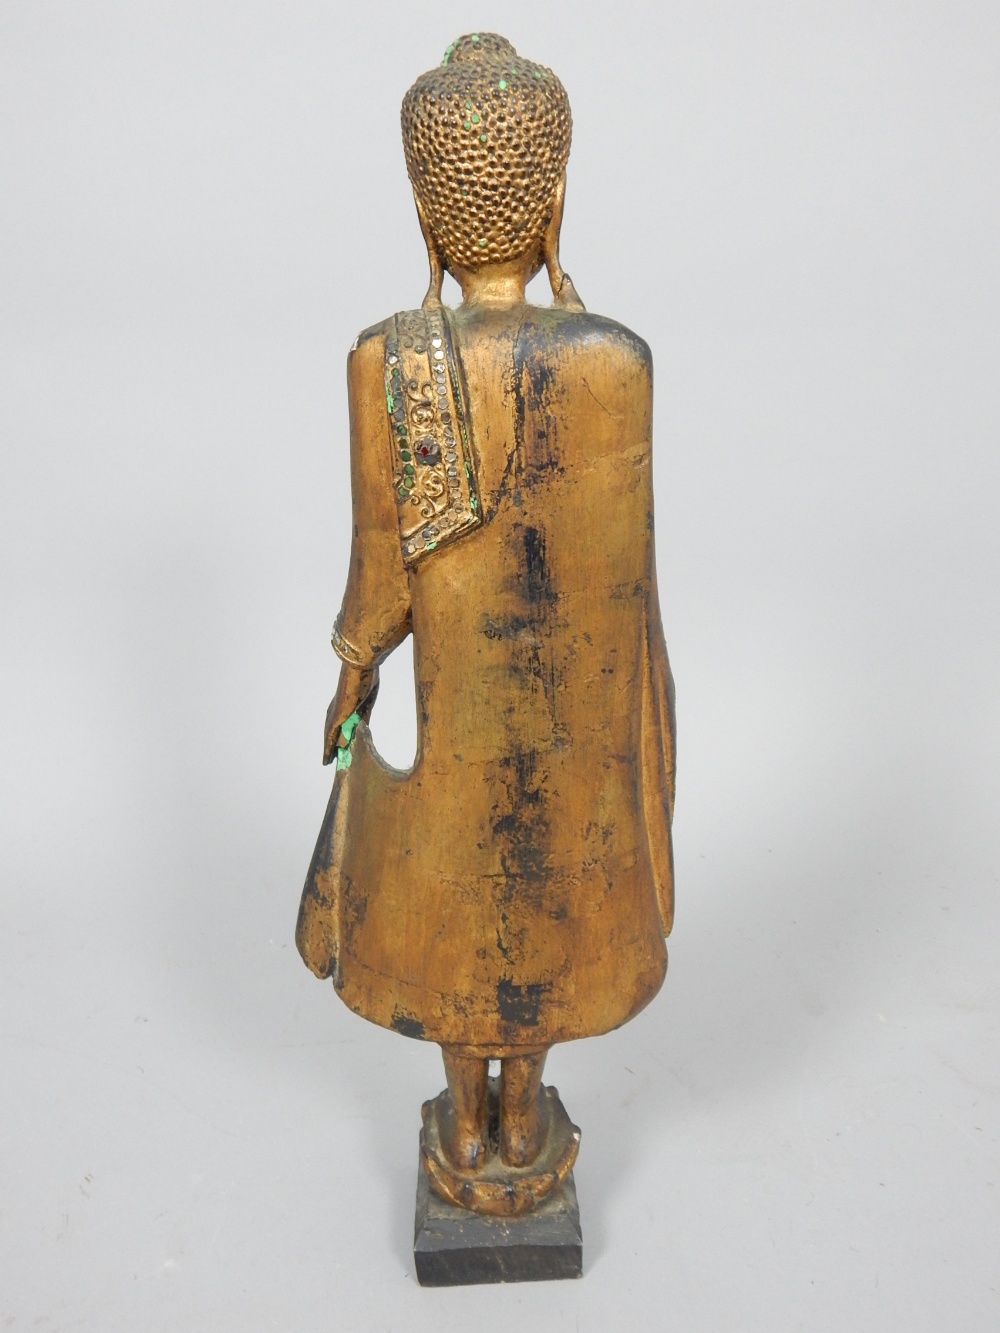 Carved study of Buddha, gilded and jewelled, c. - Image 2 of 2